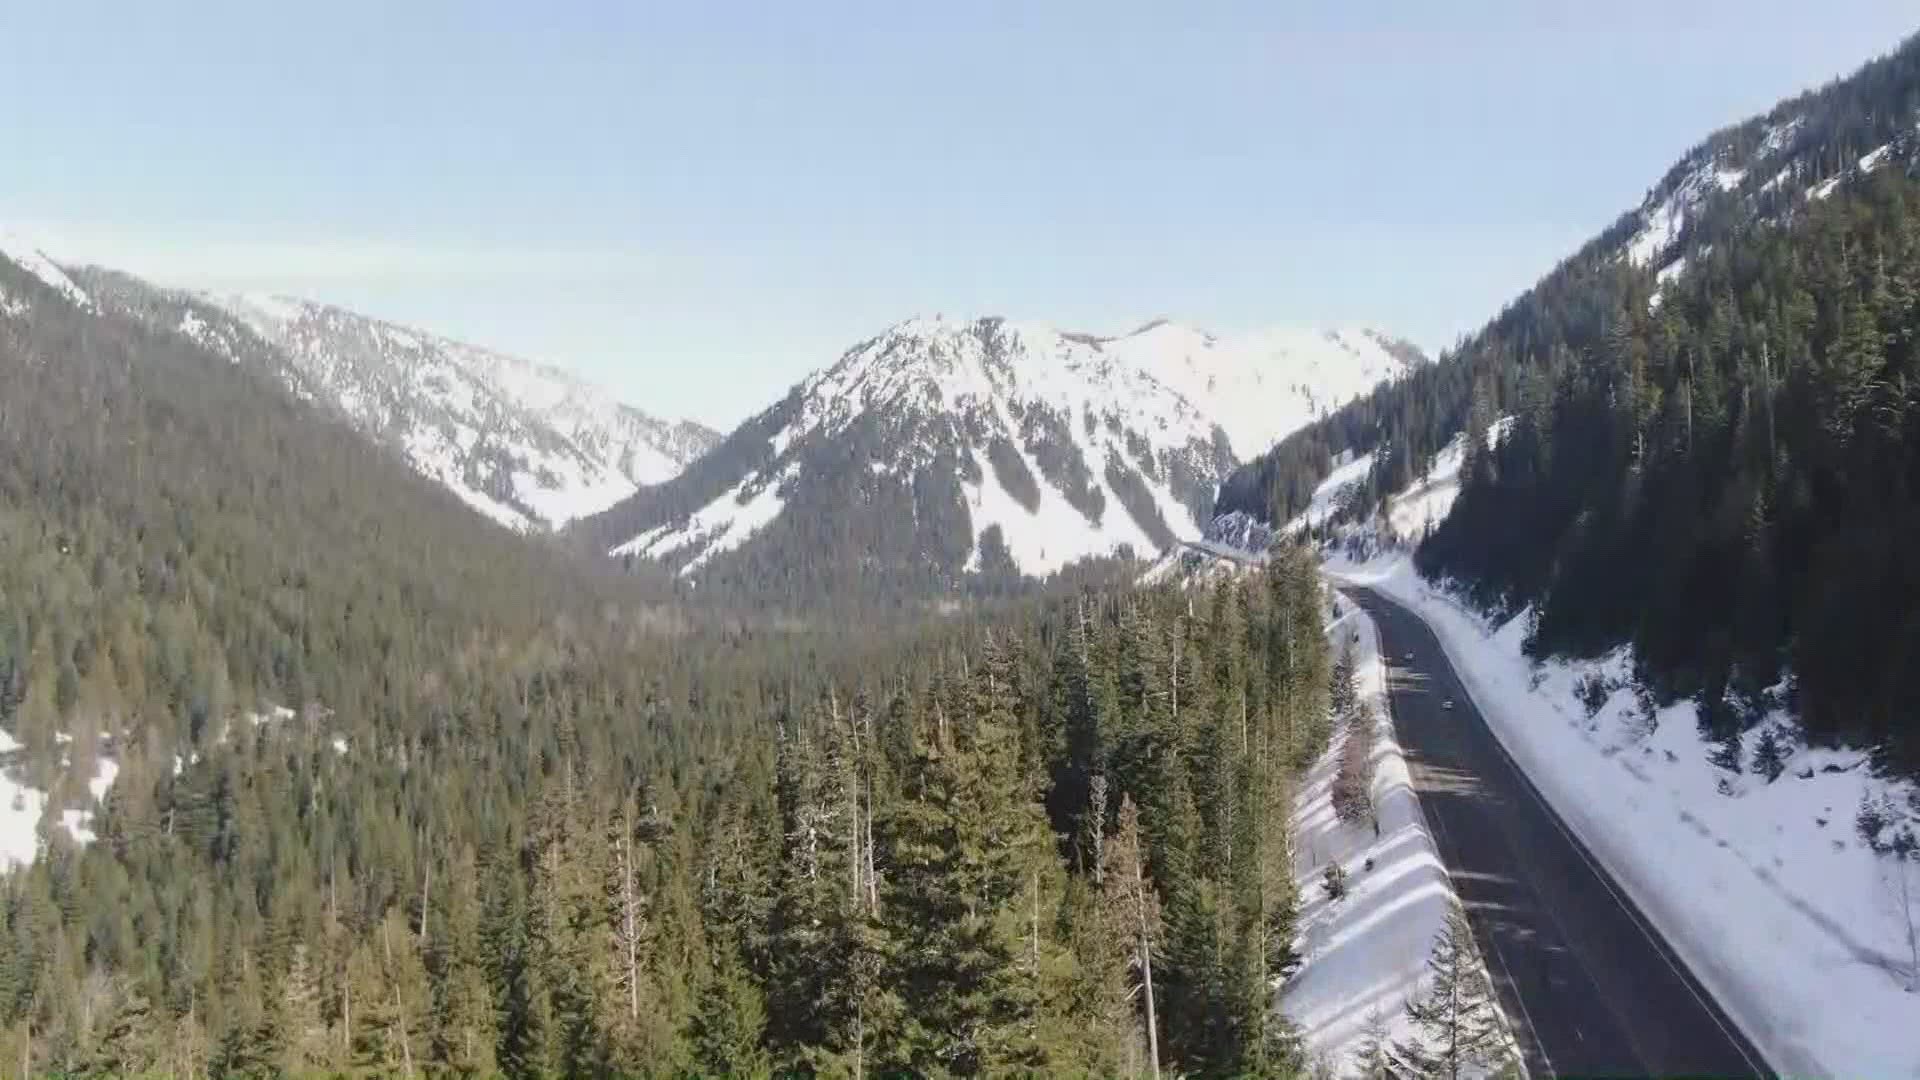 Five human-triggered avalanches have occurred in the past week around Snoqualmie Pass.  Experts warn that this time of year is especially dangerous for avalanches.